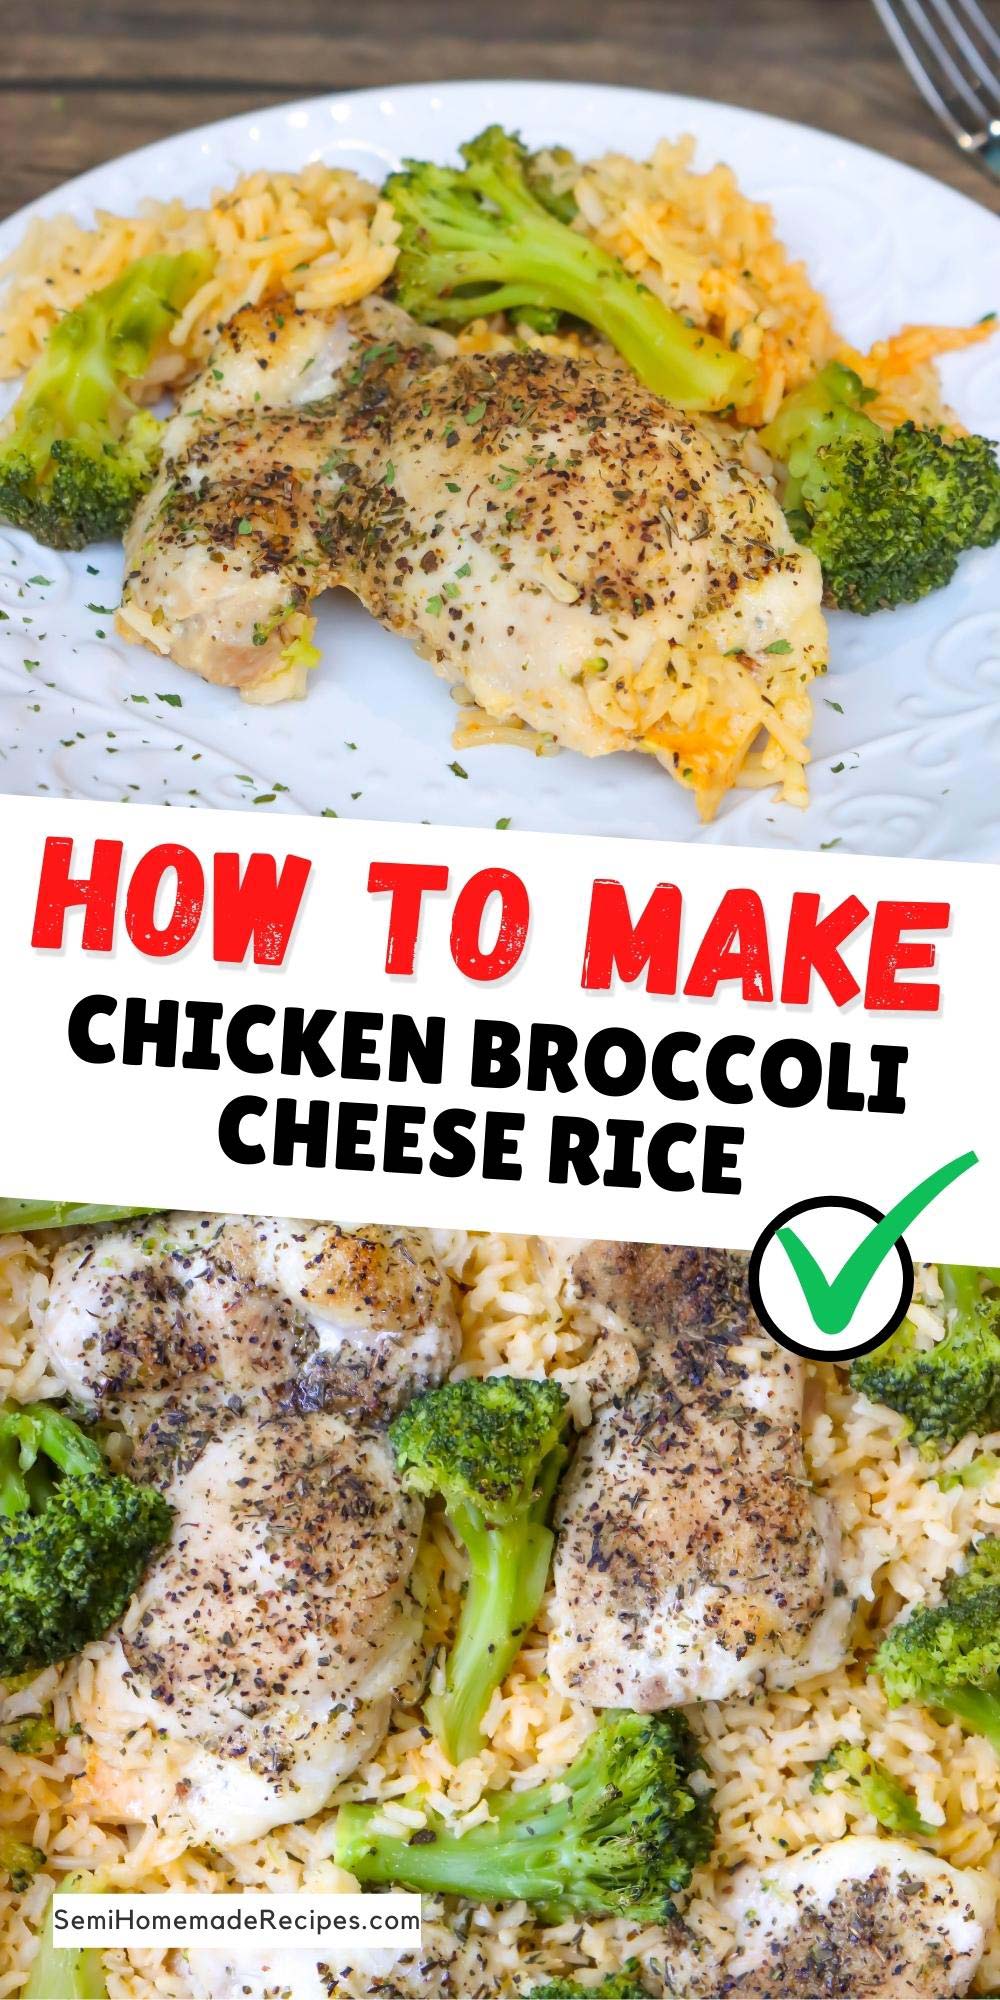 This one-pan Oven Baked Chicken Broccoli Cheese Rice only takes a few ingredients to make and you only need one casserole dish to make it! That's right! Everything cooks together in one dish! 